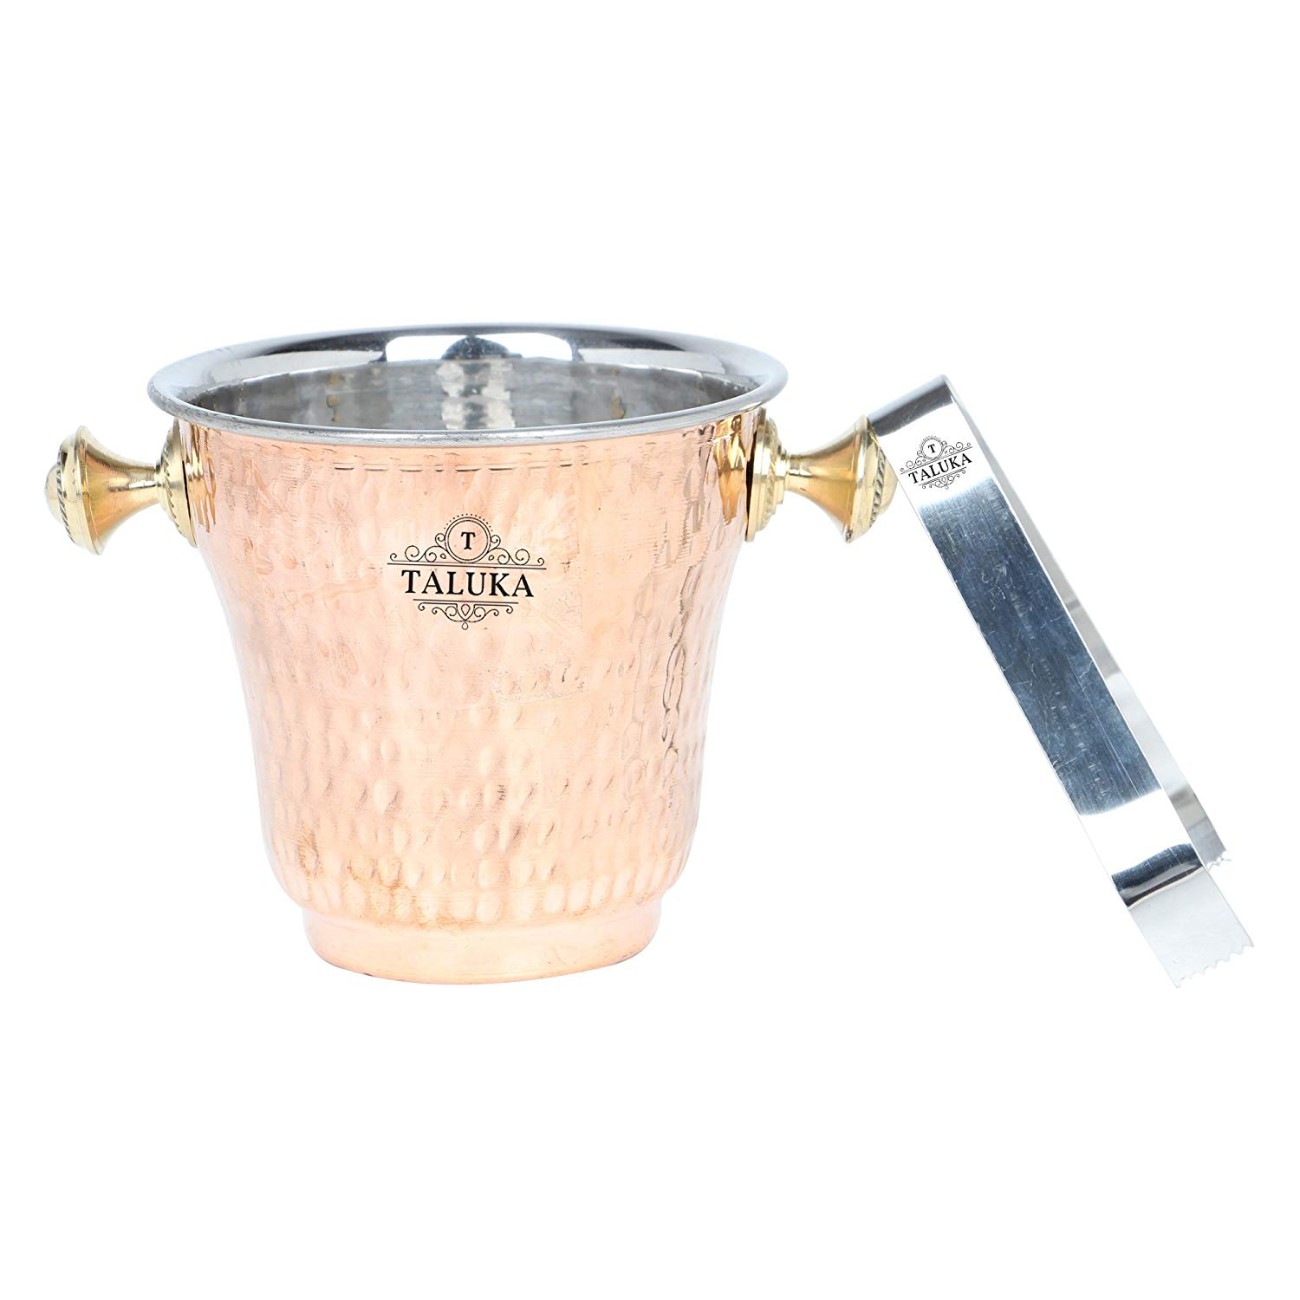 Copper Steel Ice Bucket 1500 ML With Ice Tong Bar Ware Restaurant Home Gift Purpose